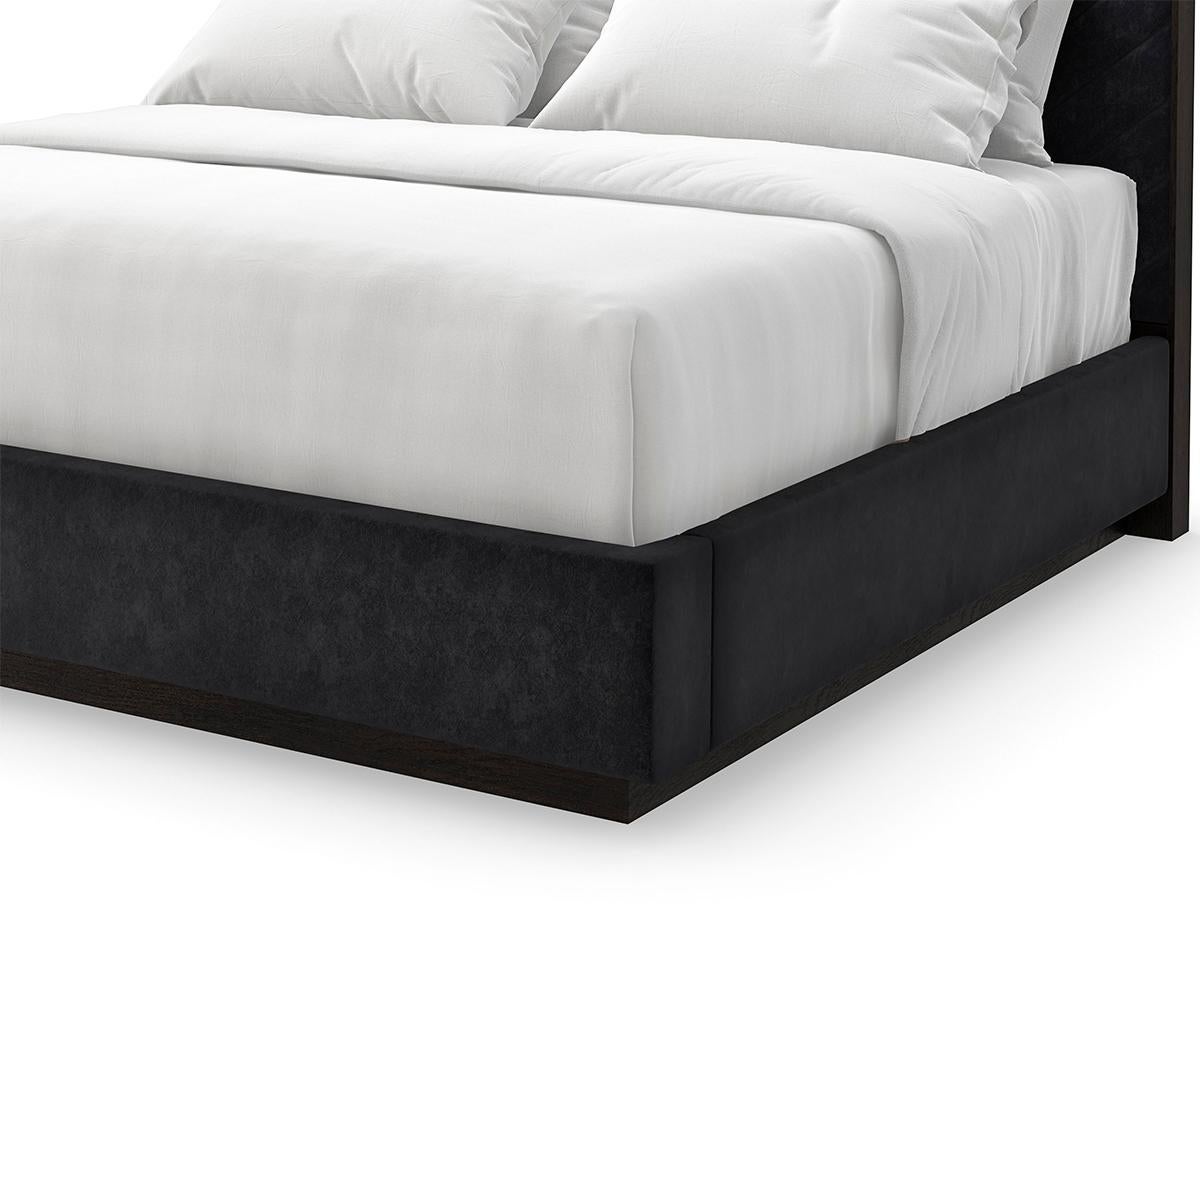 Asian Black Chevron Tufted Upholstered King Bed For Sale